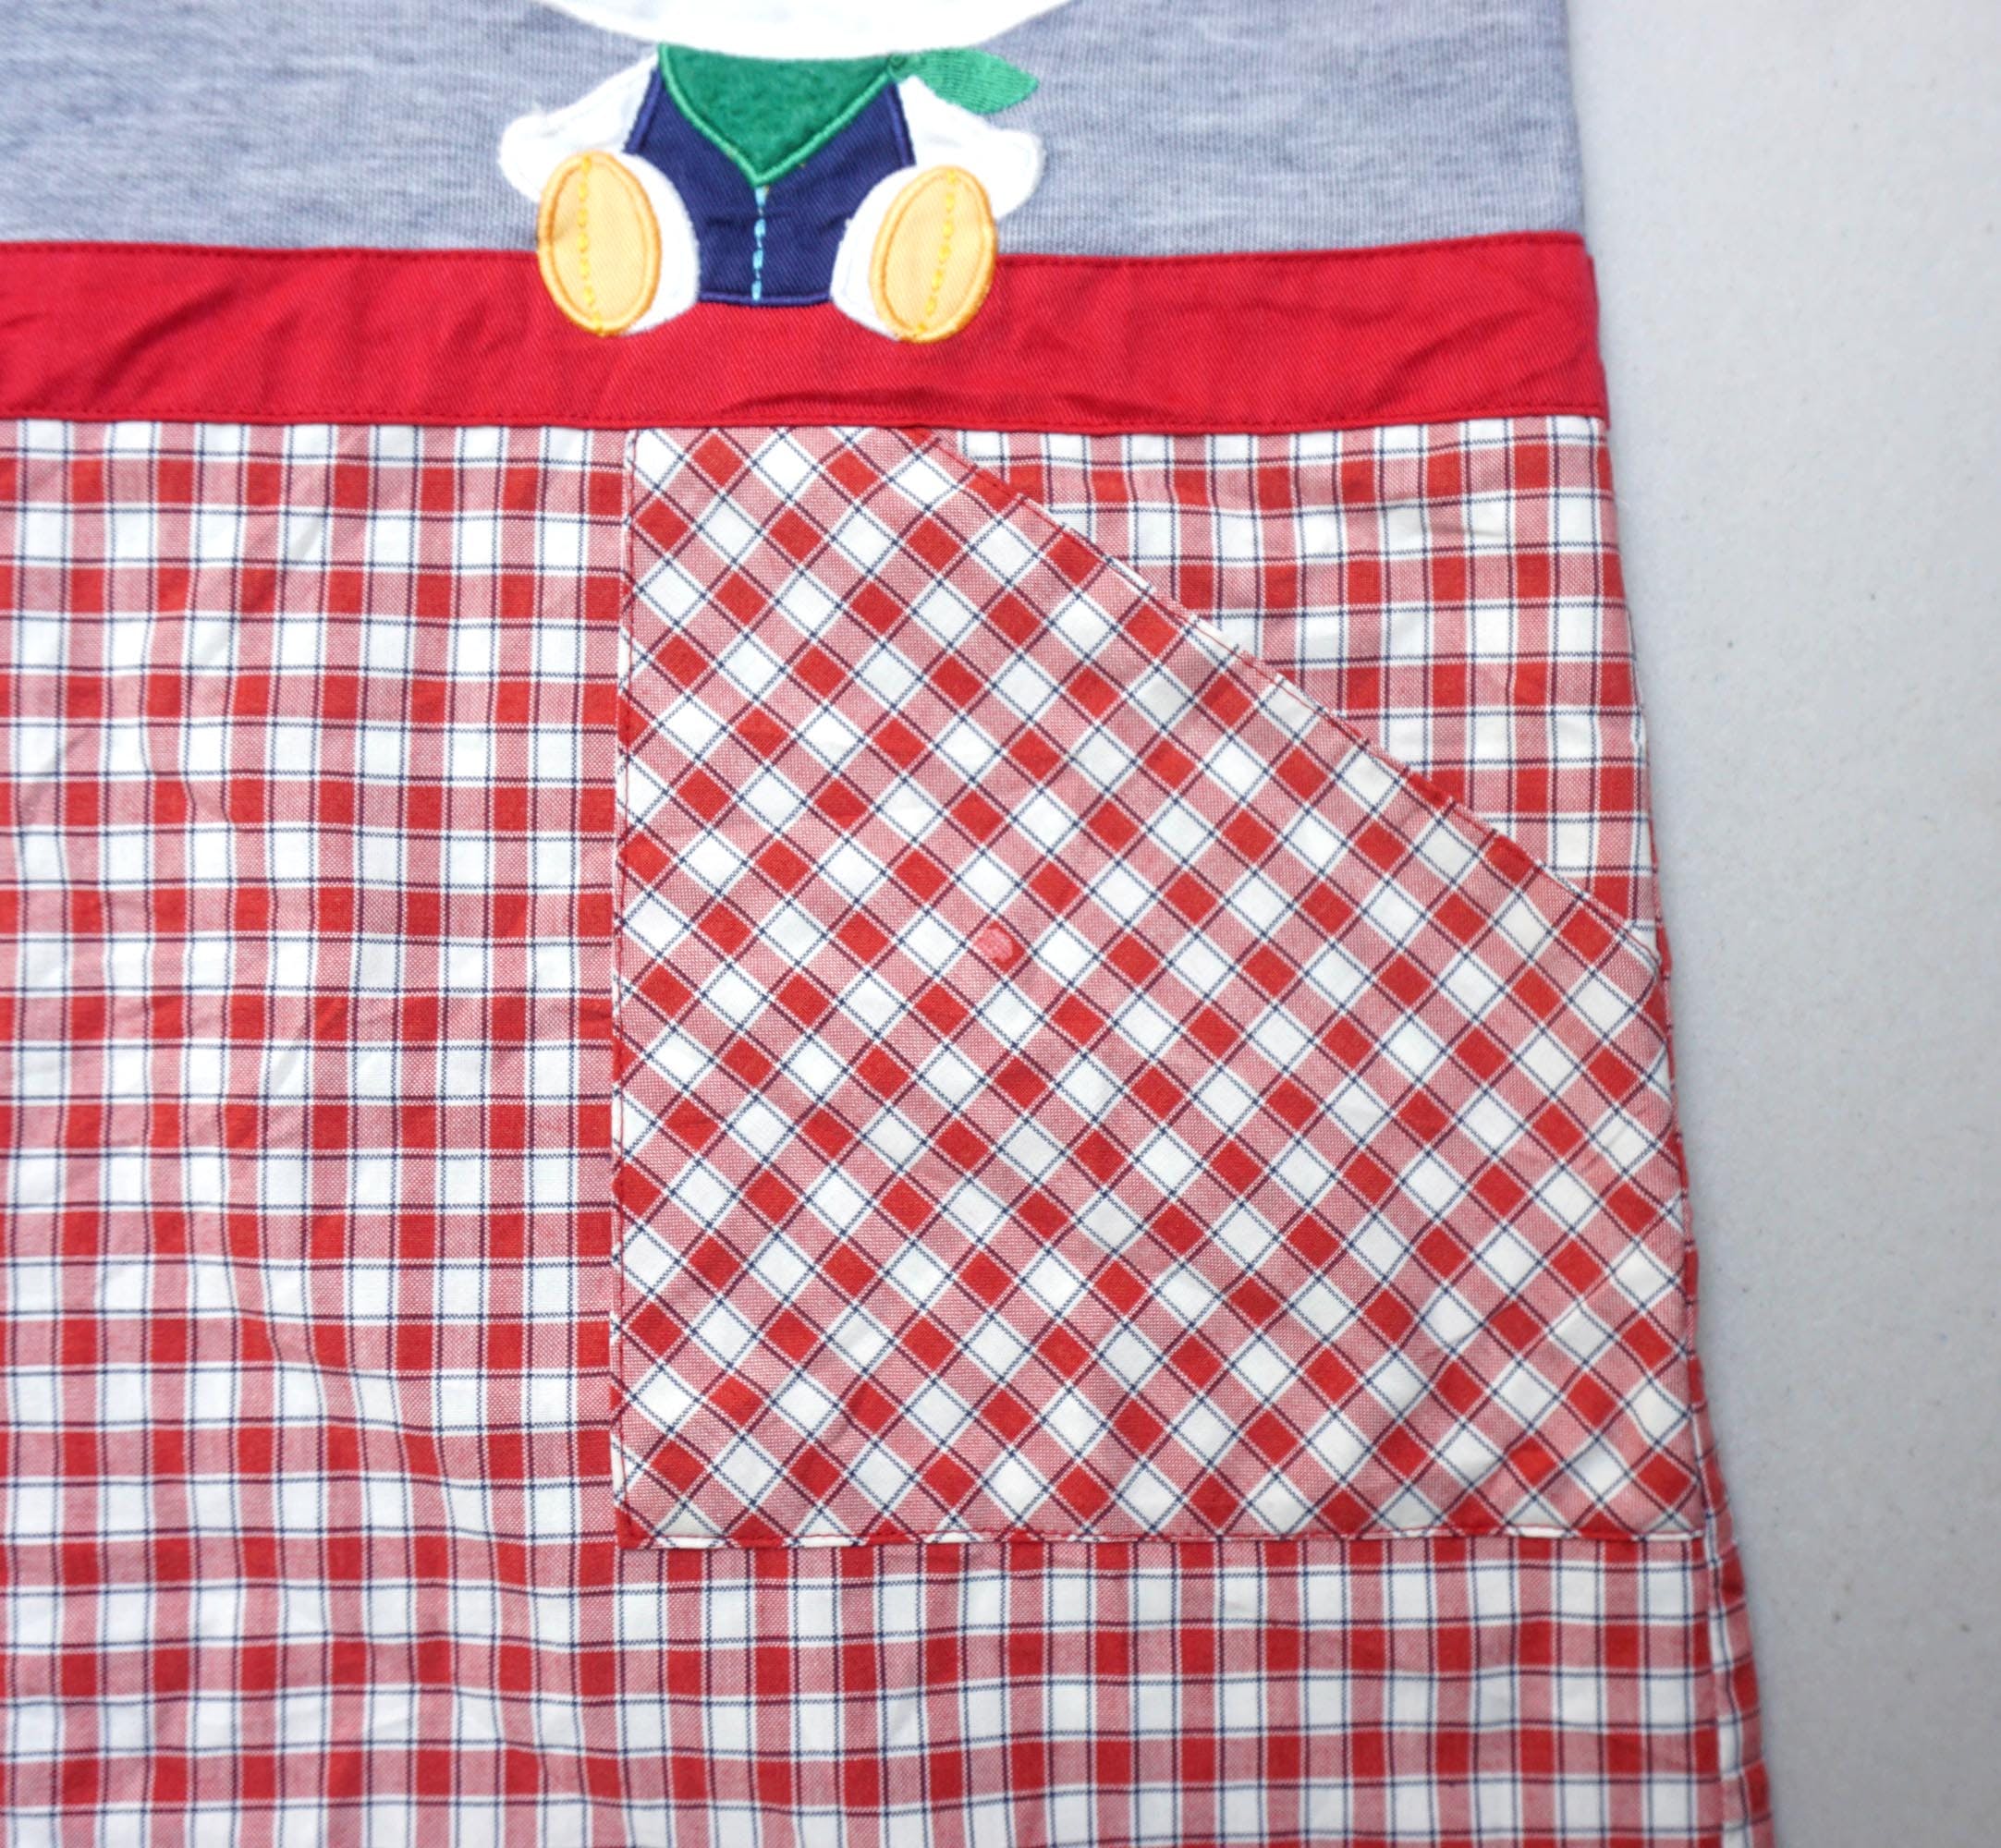 Japanese Brand - HELLO KITTY Patchwork & Checkered Apron - 6